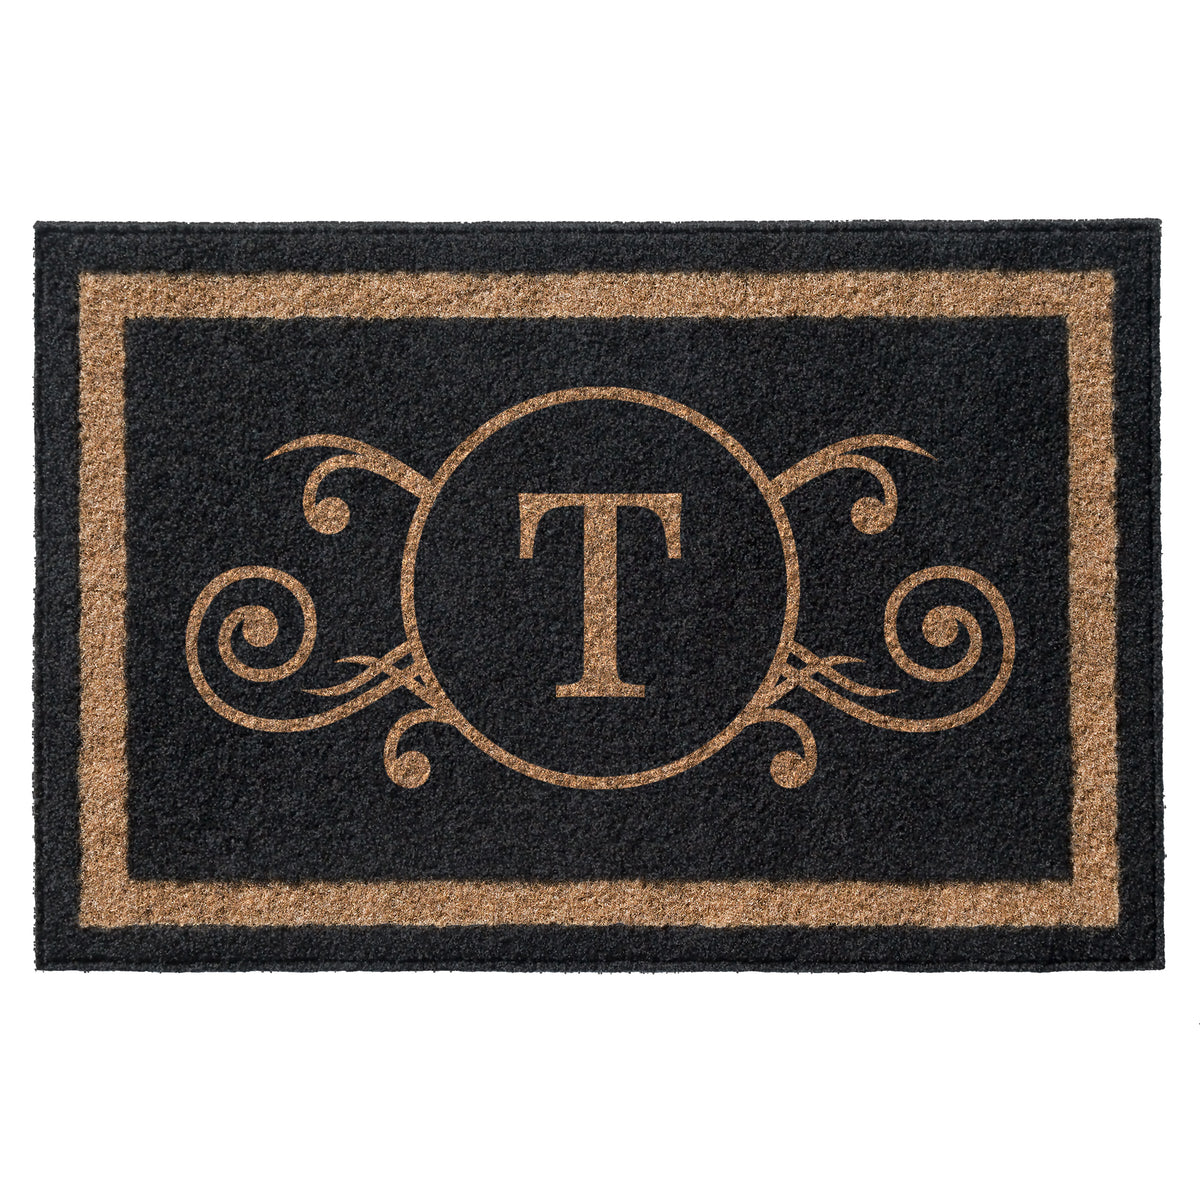 Infinity Custom Mats™ All-Weather Personalized Door Mat - STYLE: MONOGRAM SCROLL COLOR:BLACK - rugsthatfit.com